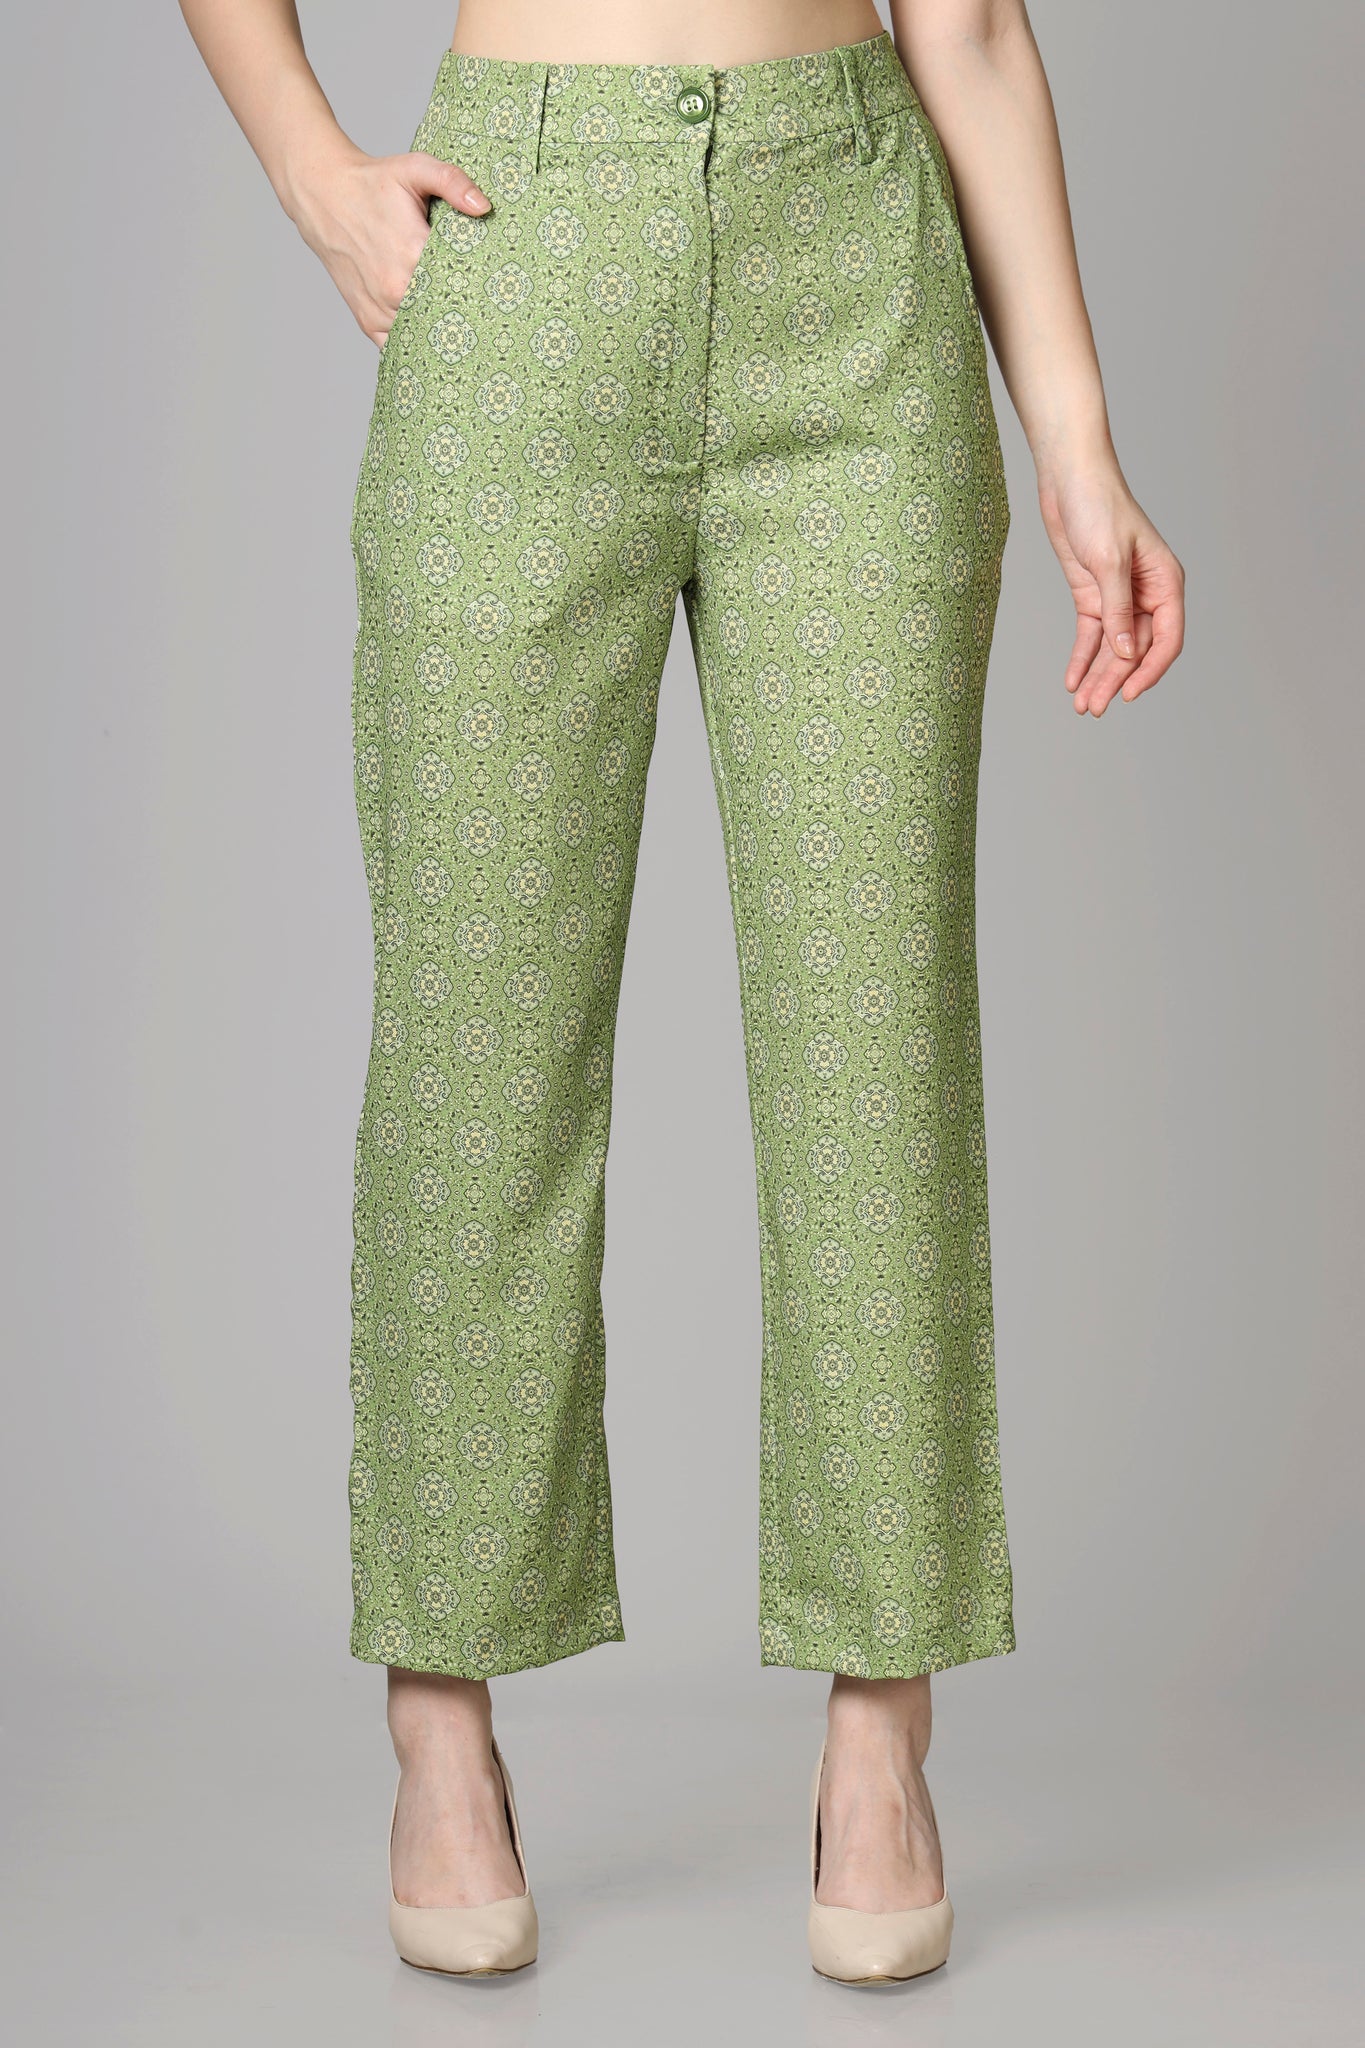 Seamless Floral Women's Trousers